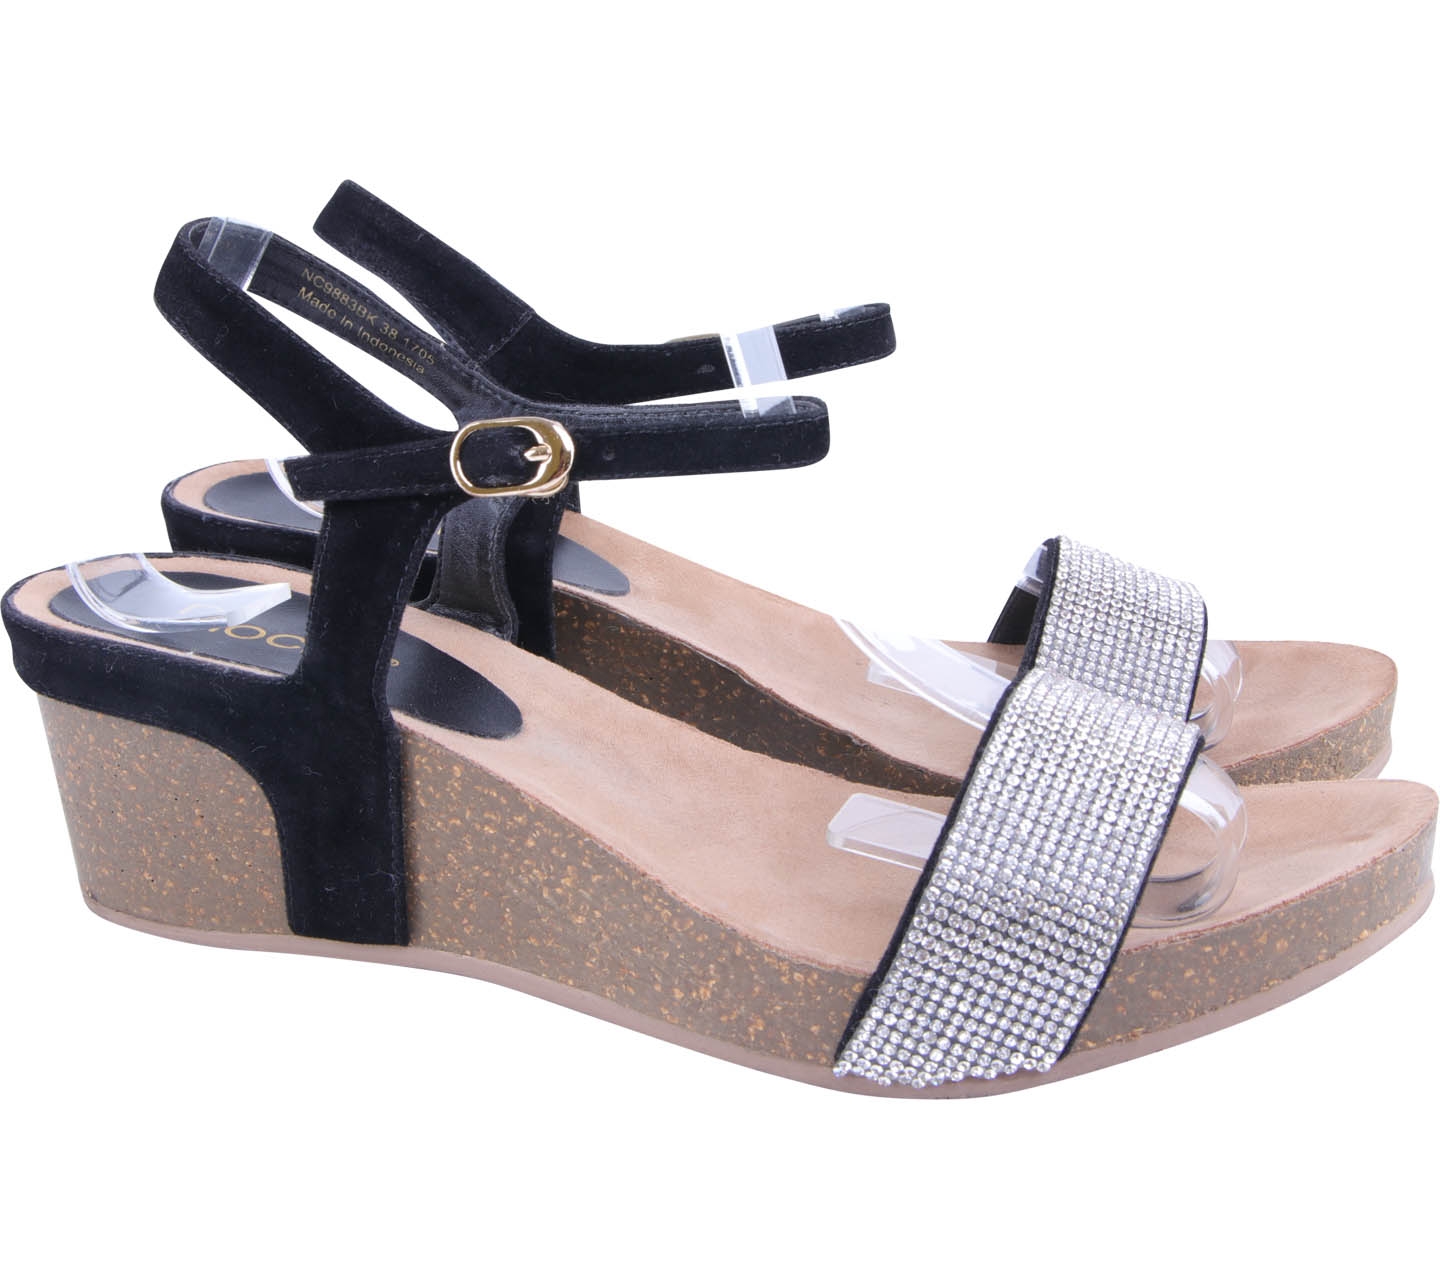 Noche Brown Embelishment Wedges